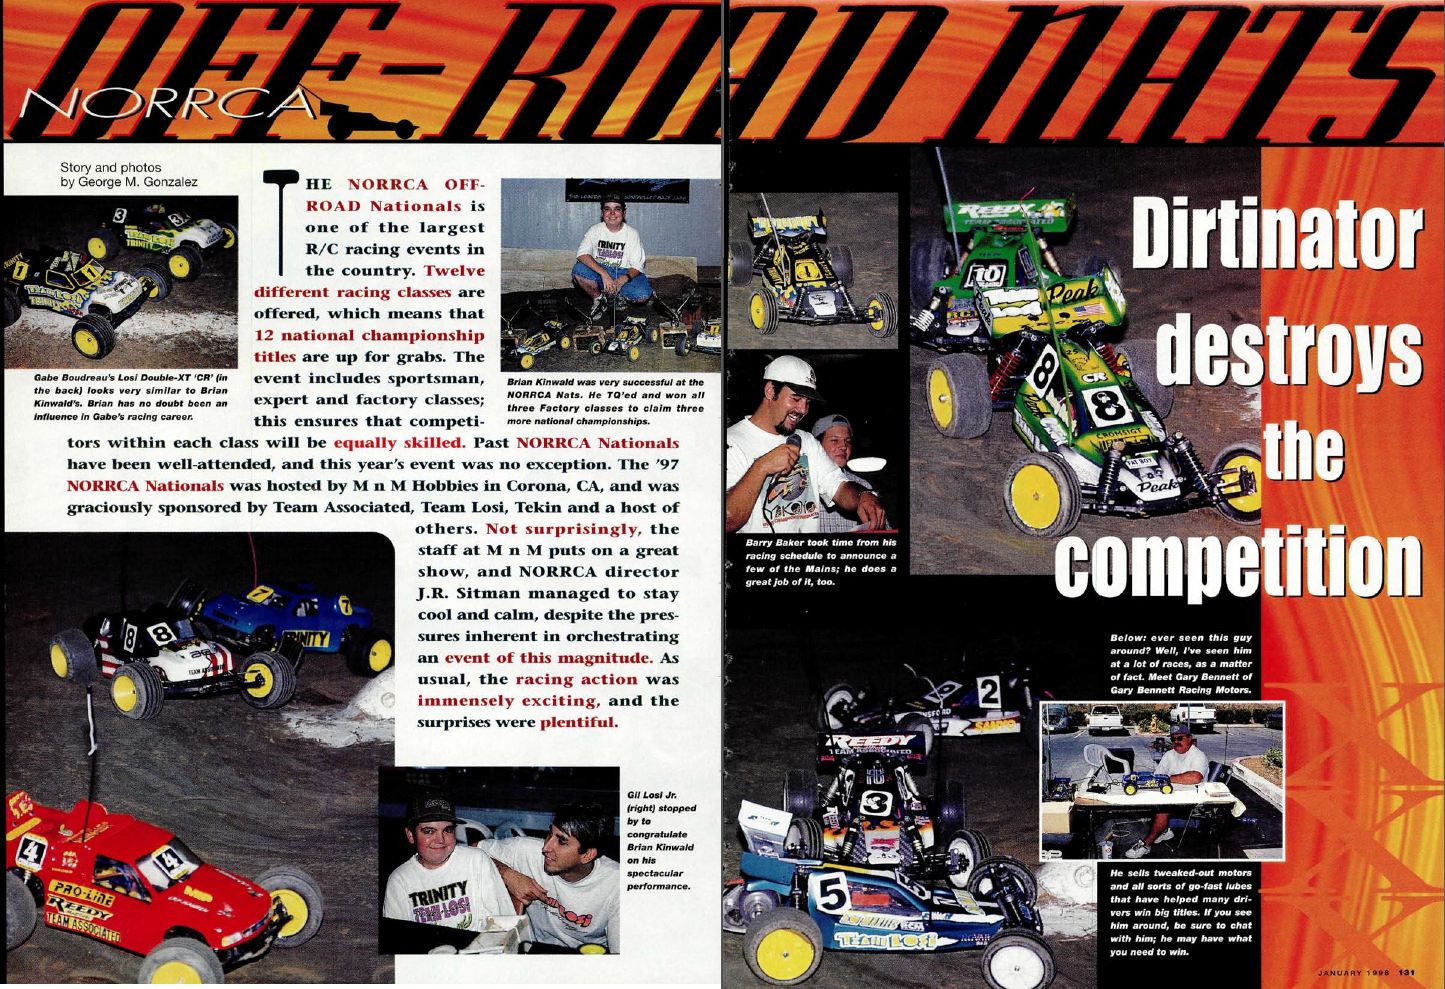 RC Car Action - RC Cars & Trucks | #TBT NORRCA Off-Road Nationals at M n M Hobbies in 1997